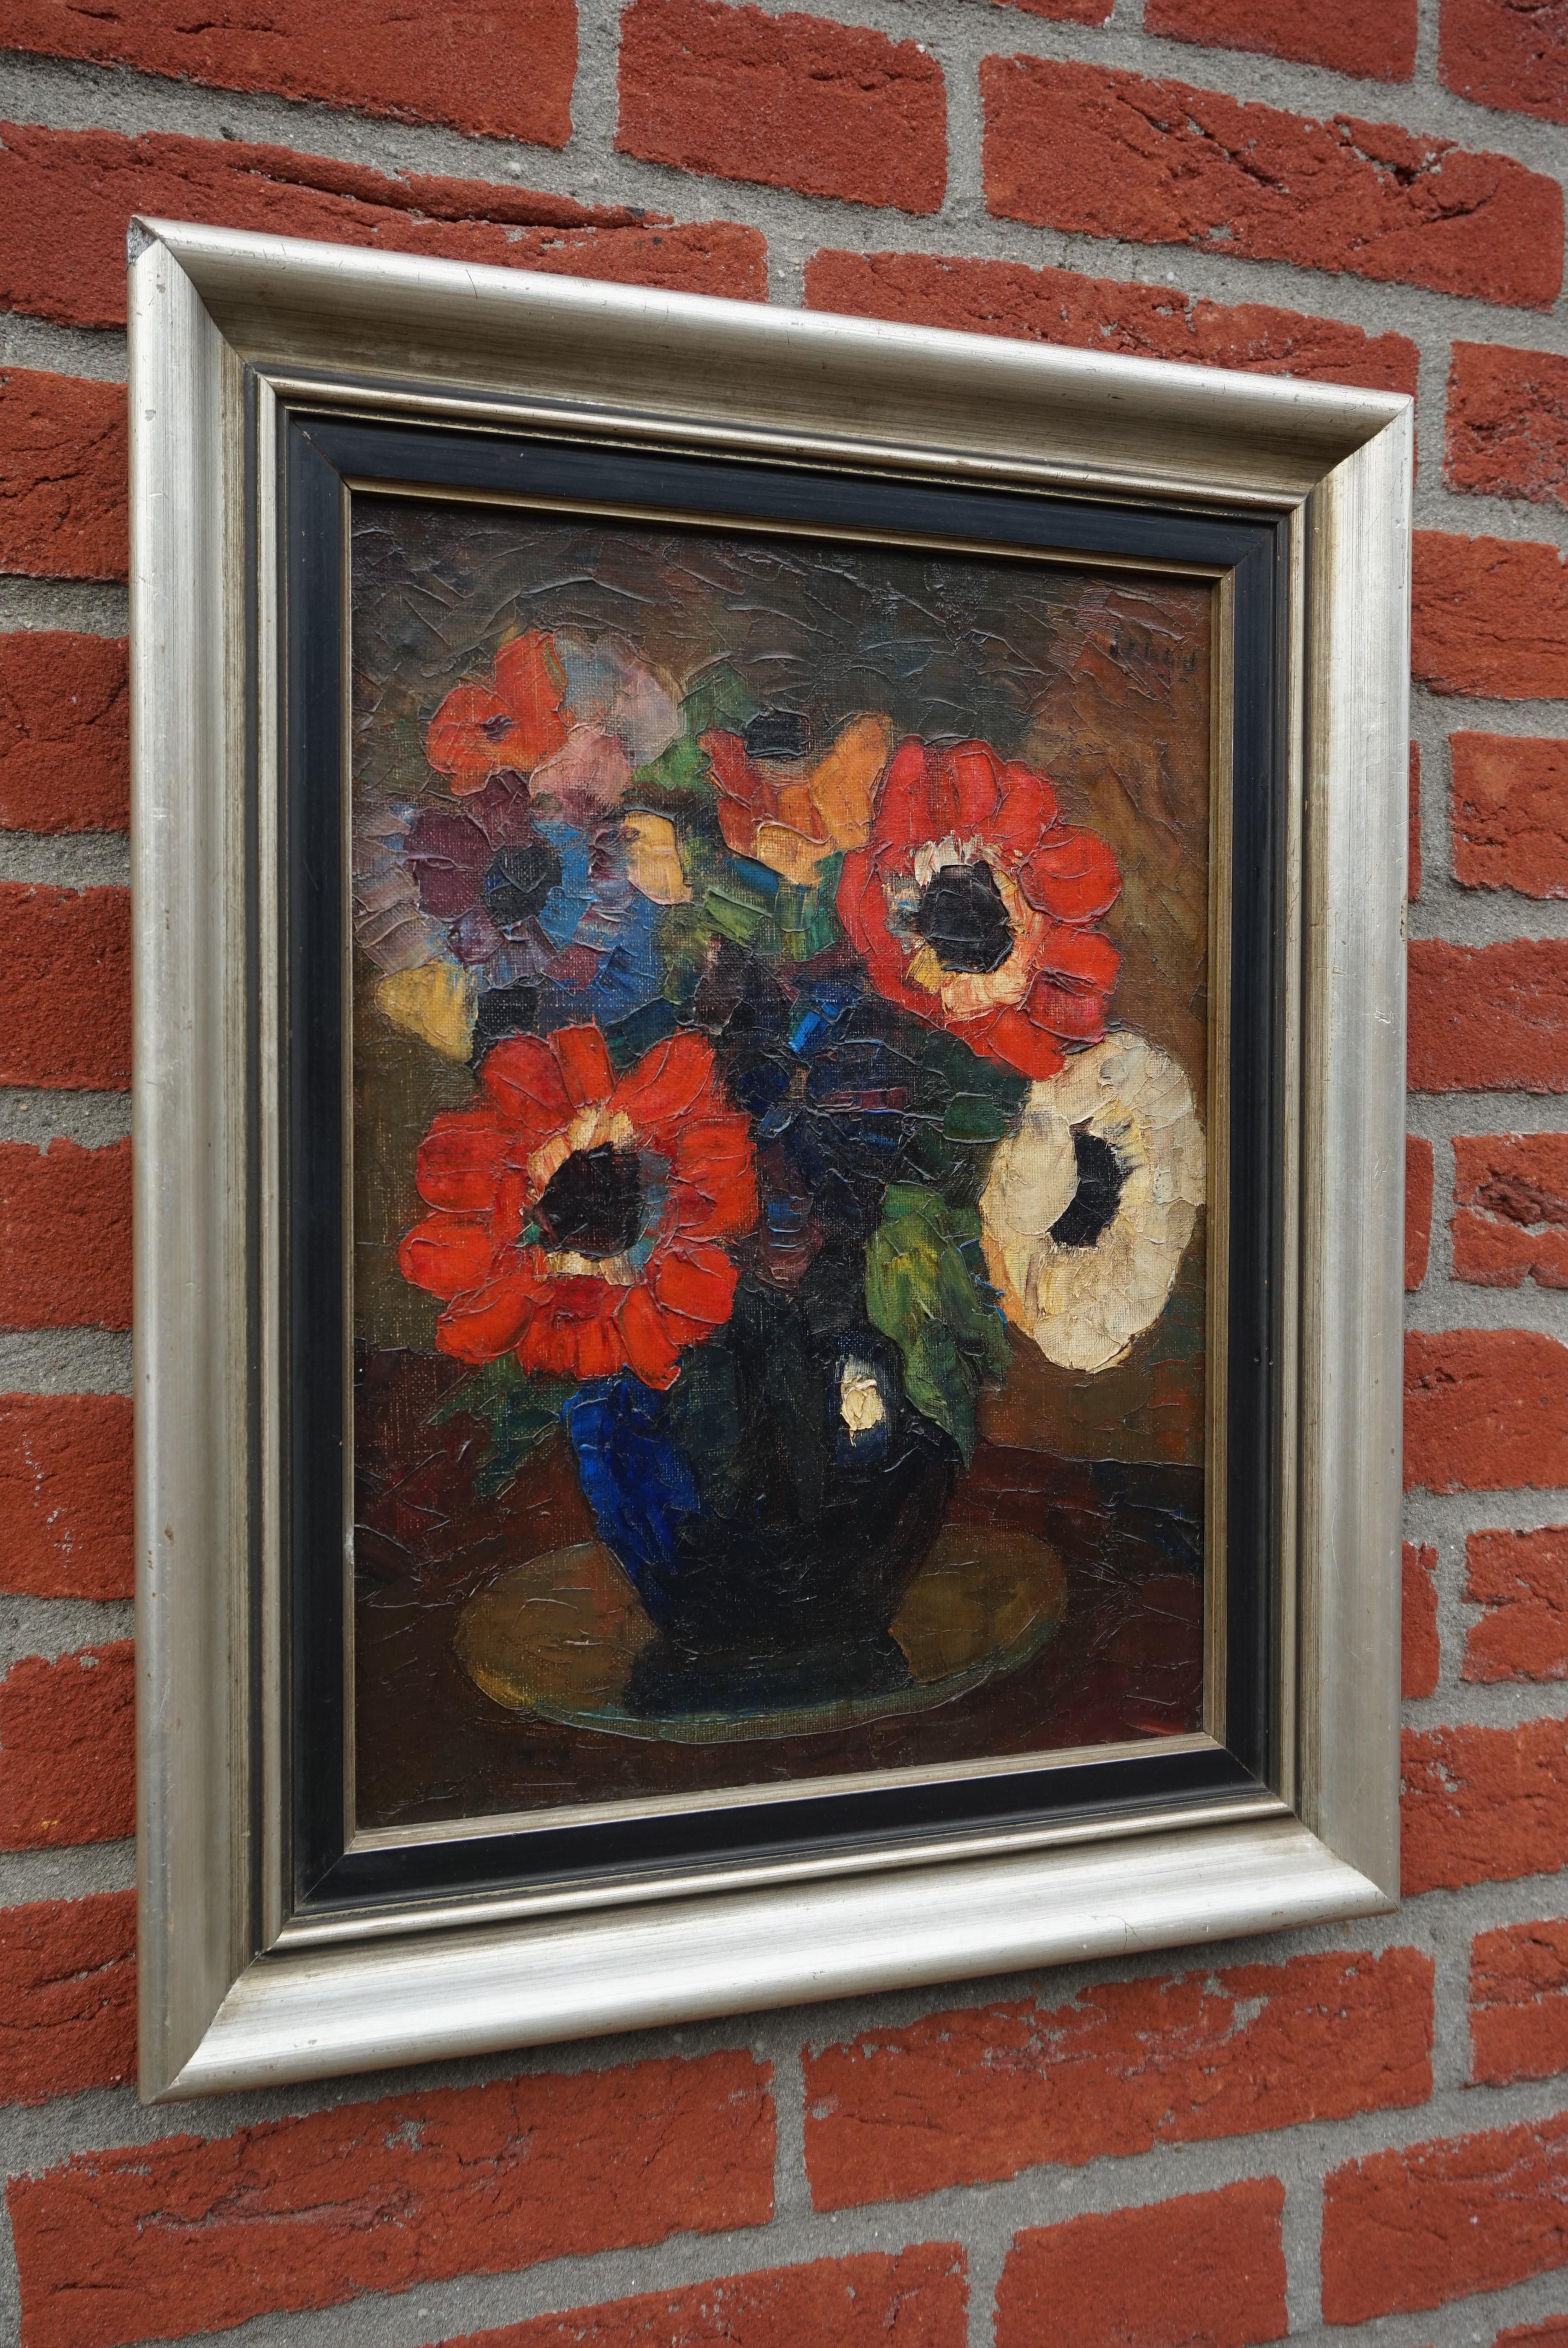 Early to Mid-20th Century Colorful & Vibrant Bouquet of Flowers in Vase Painting For Sale 1